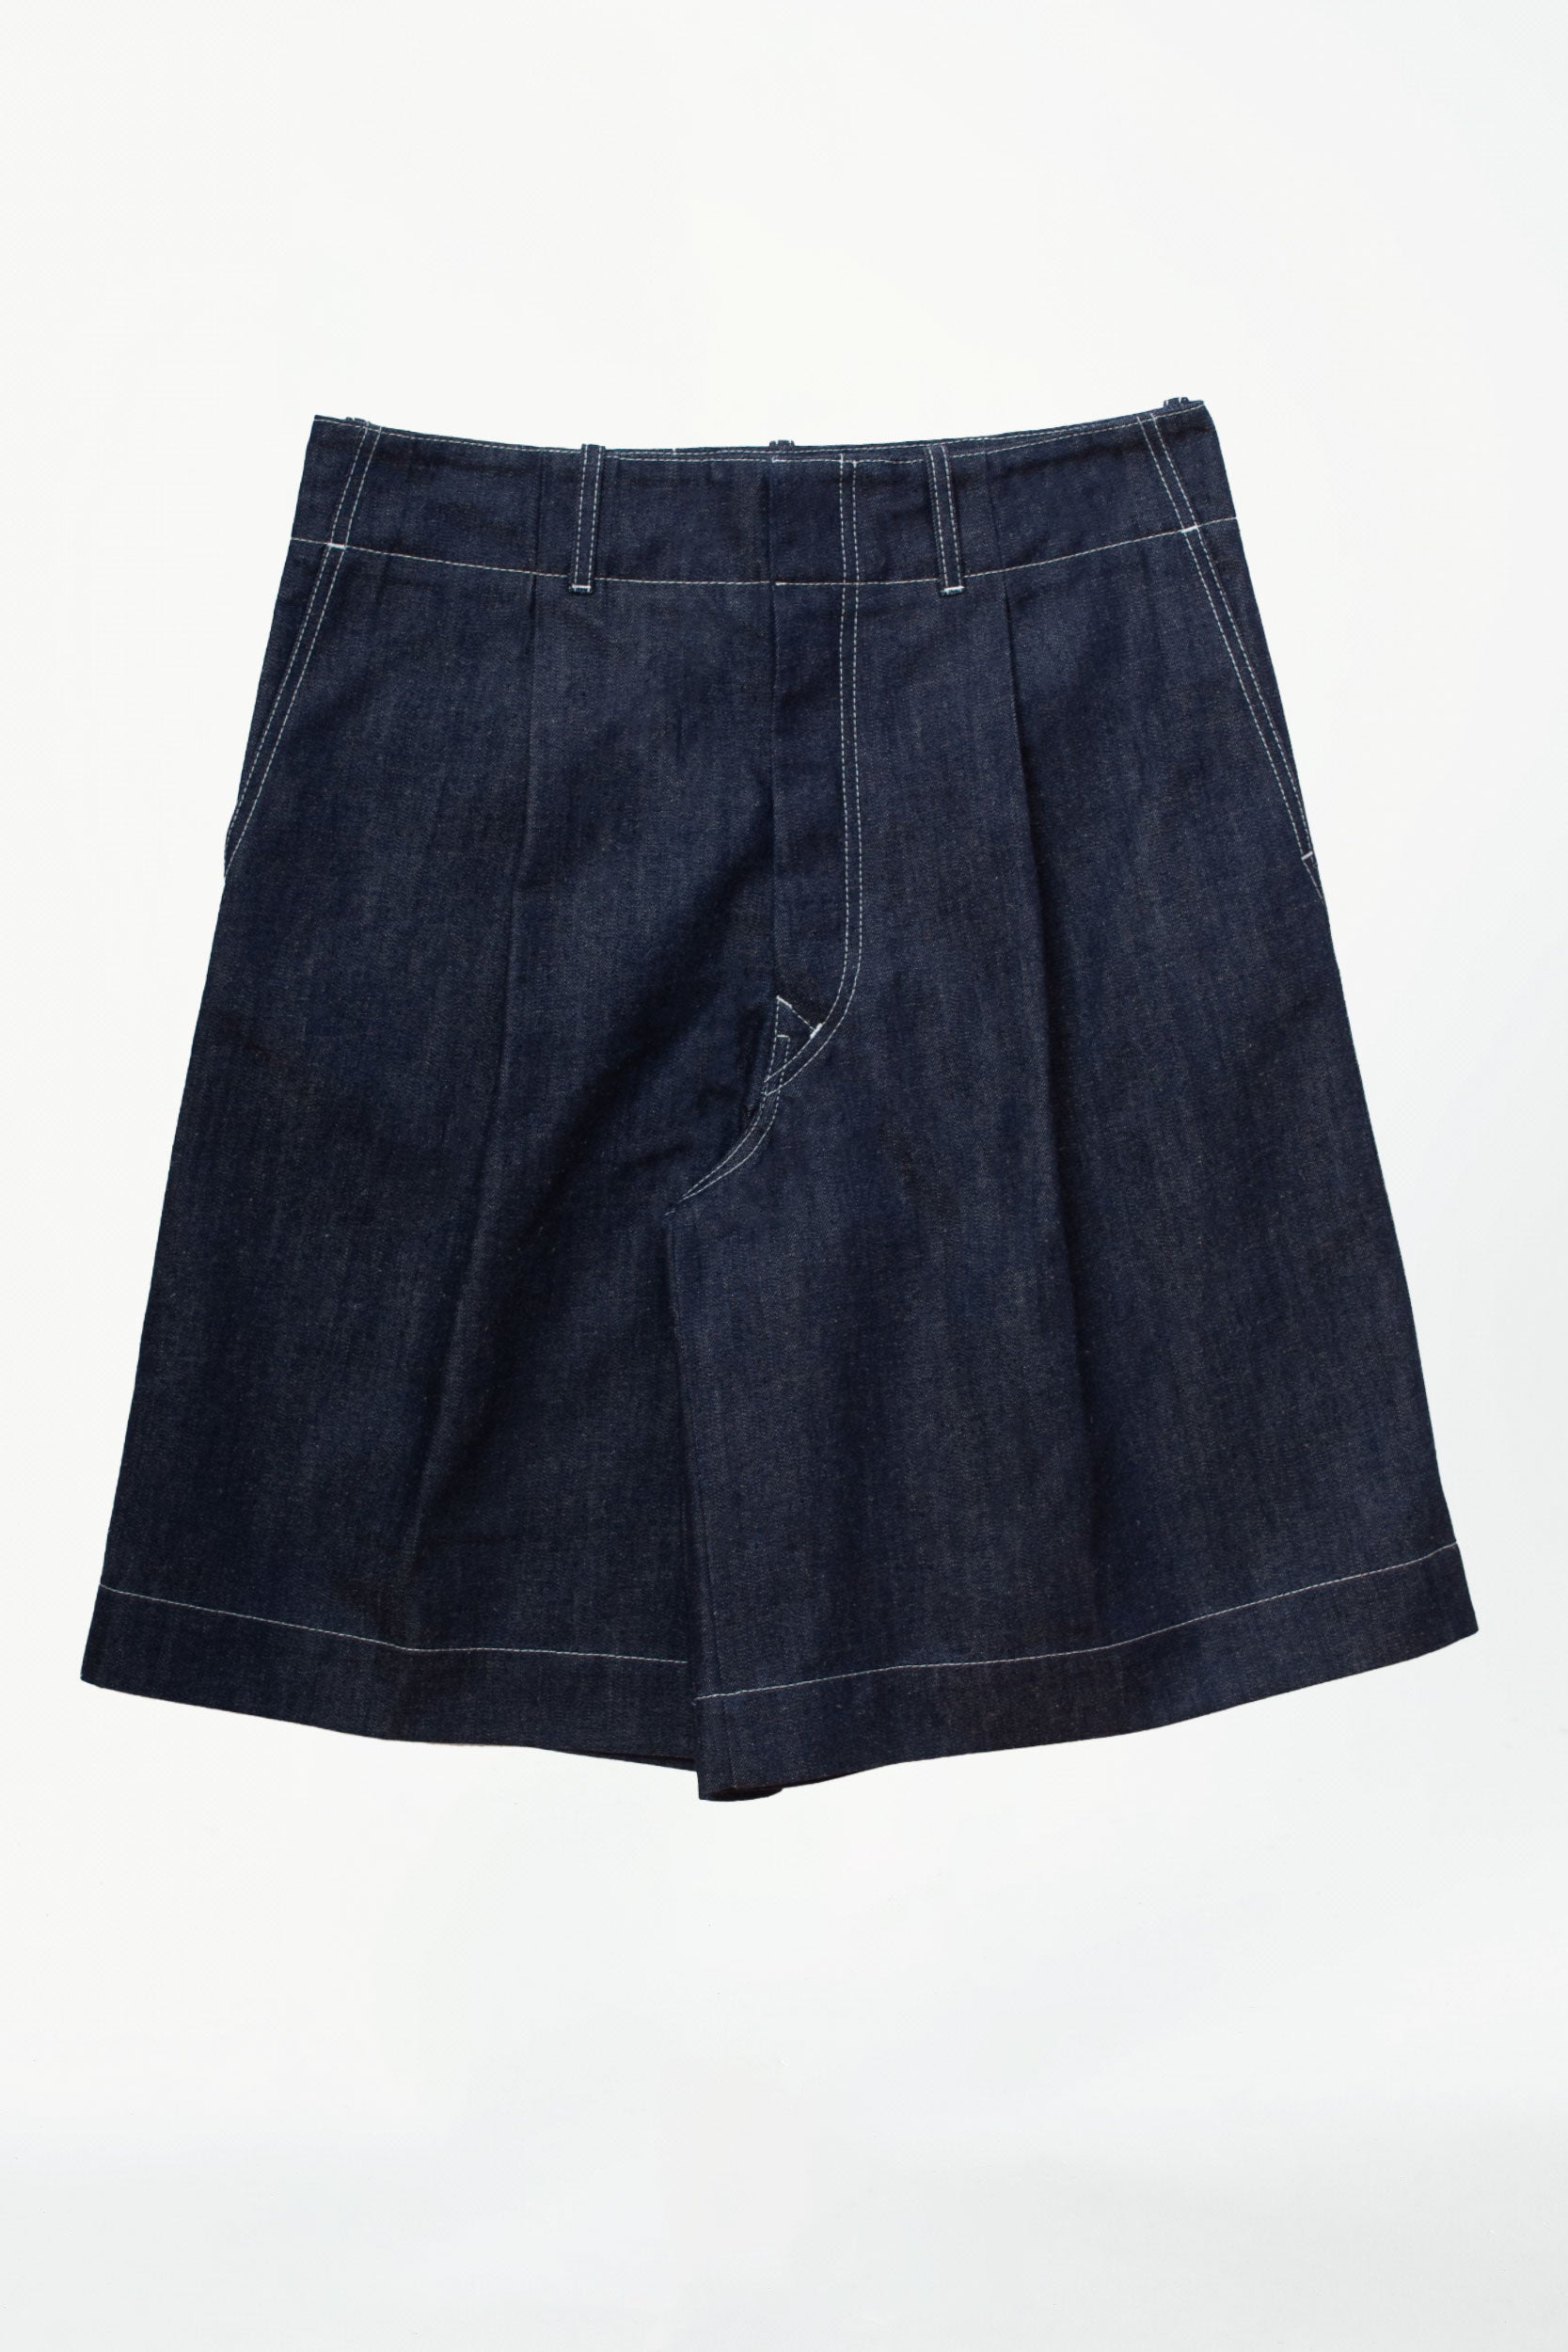 CONTRASTED DENIM PLEATED SHORTS